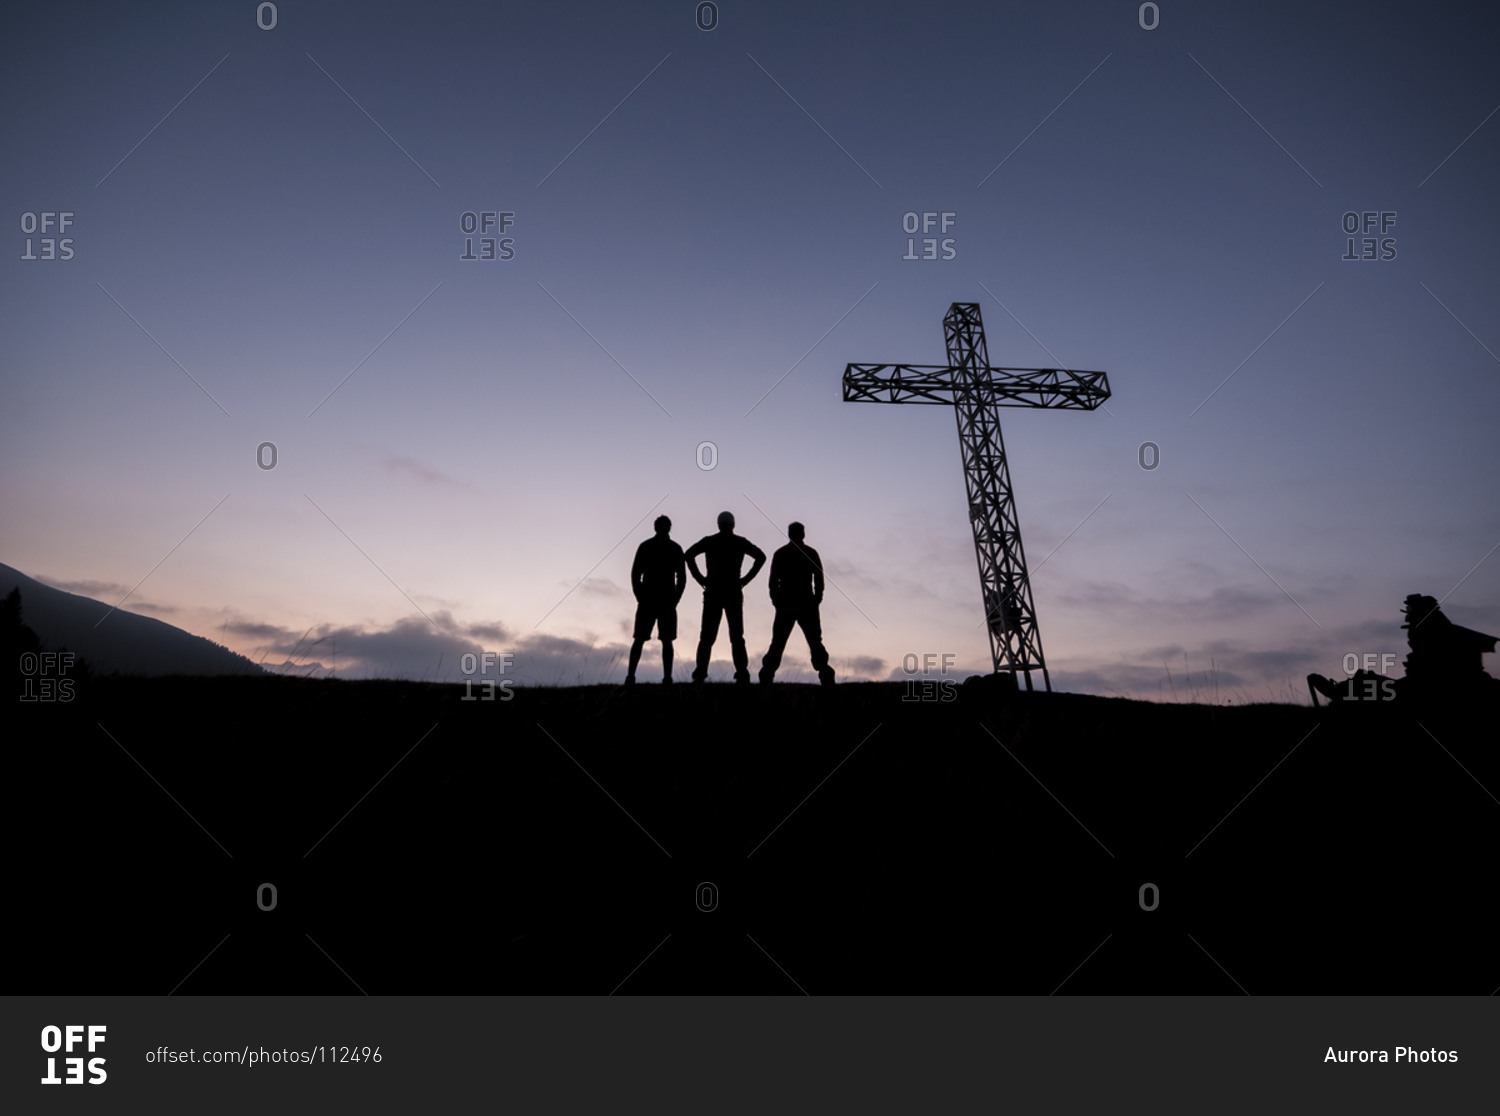 Silhouette of three boys standing near a cross at the summit of a mountain, Ossola, Italy